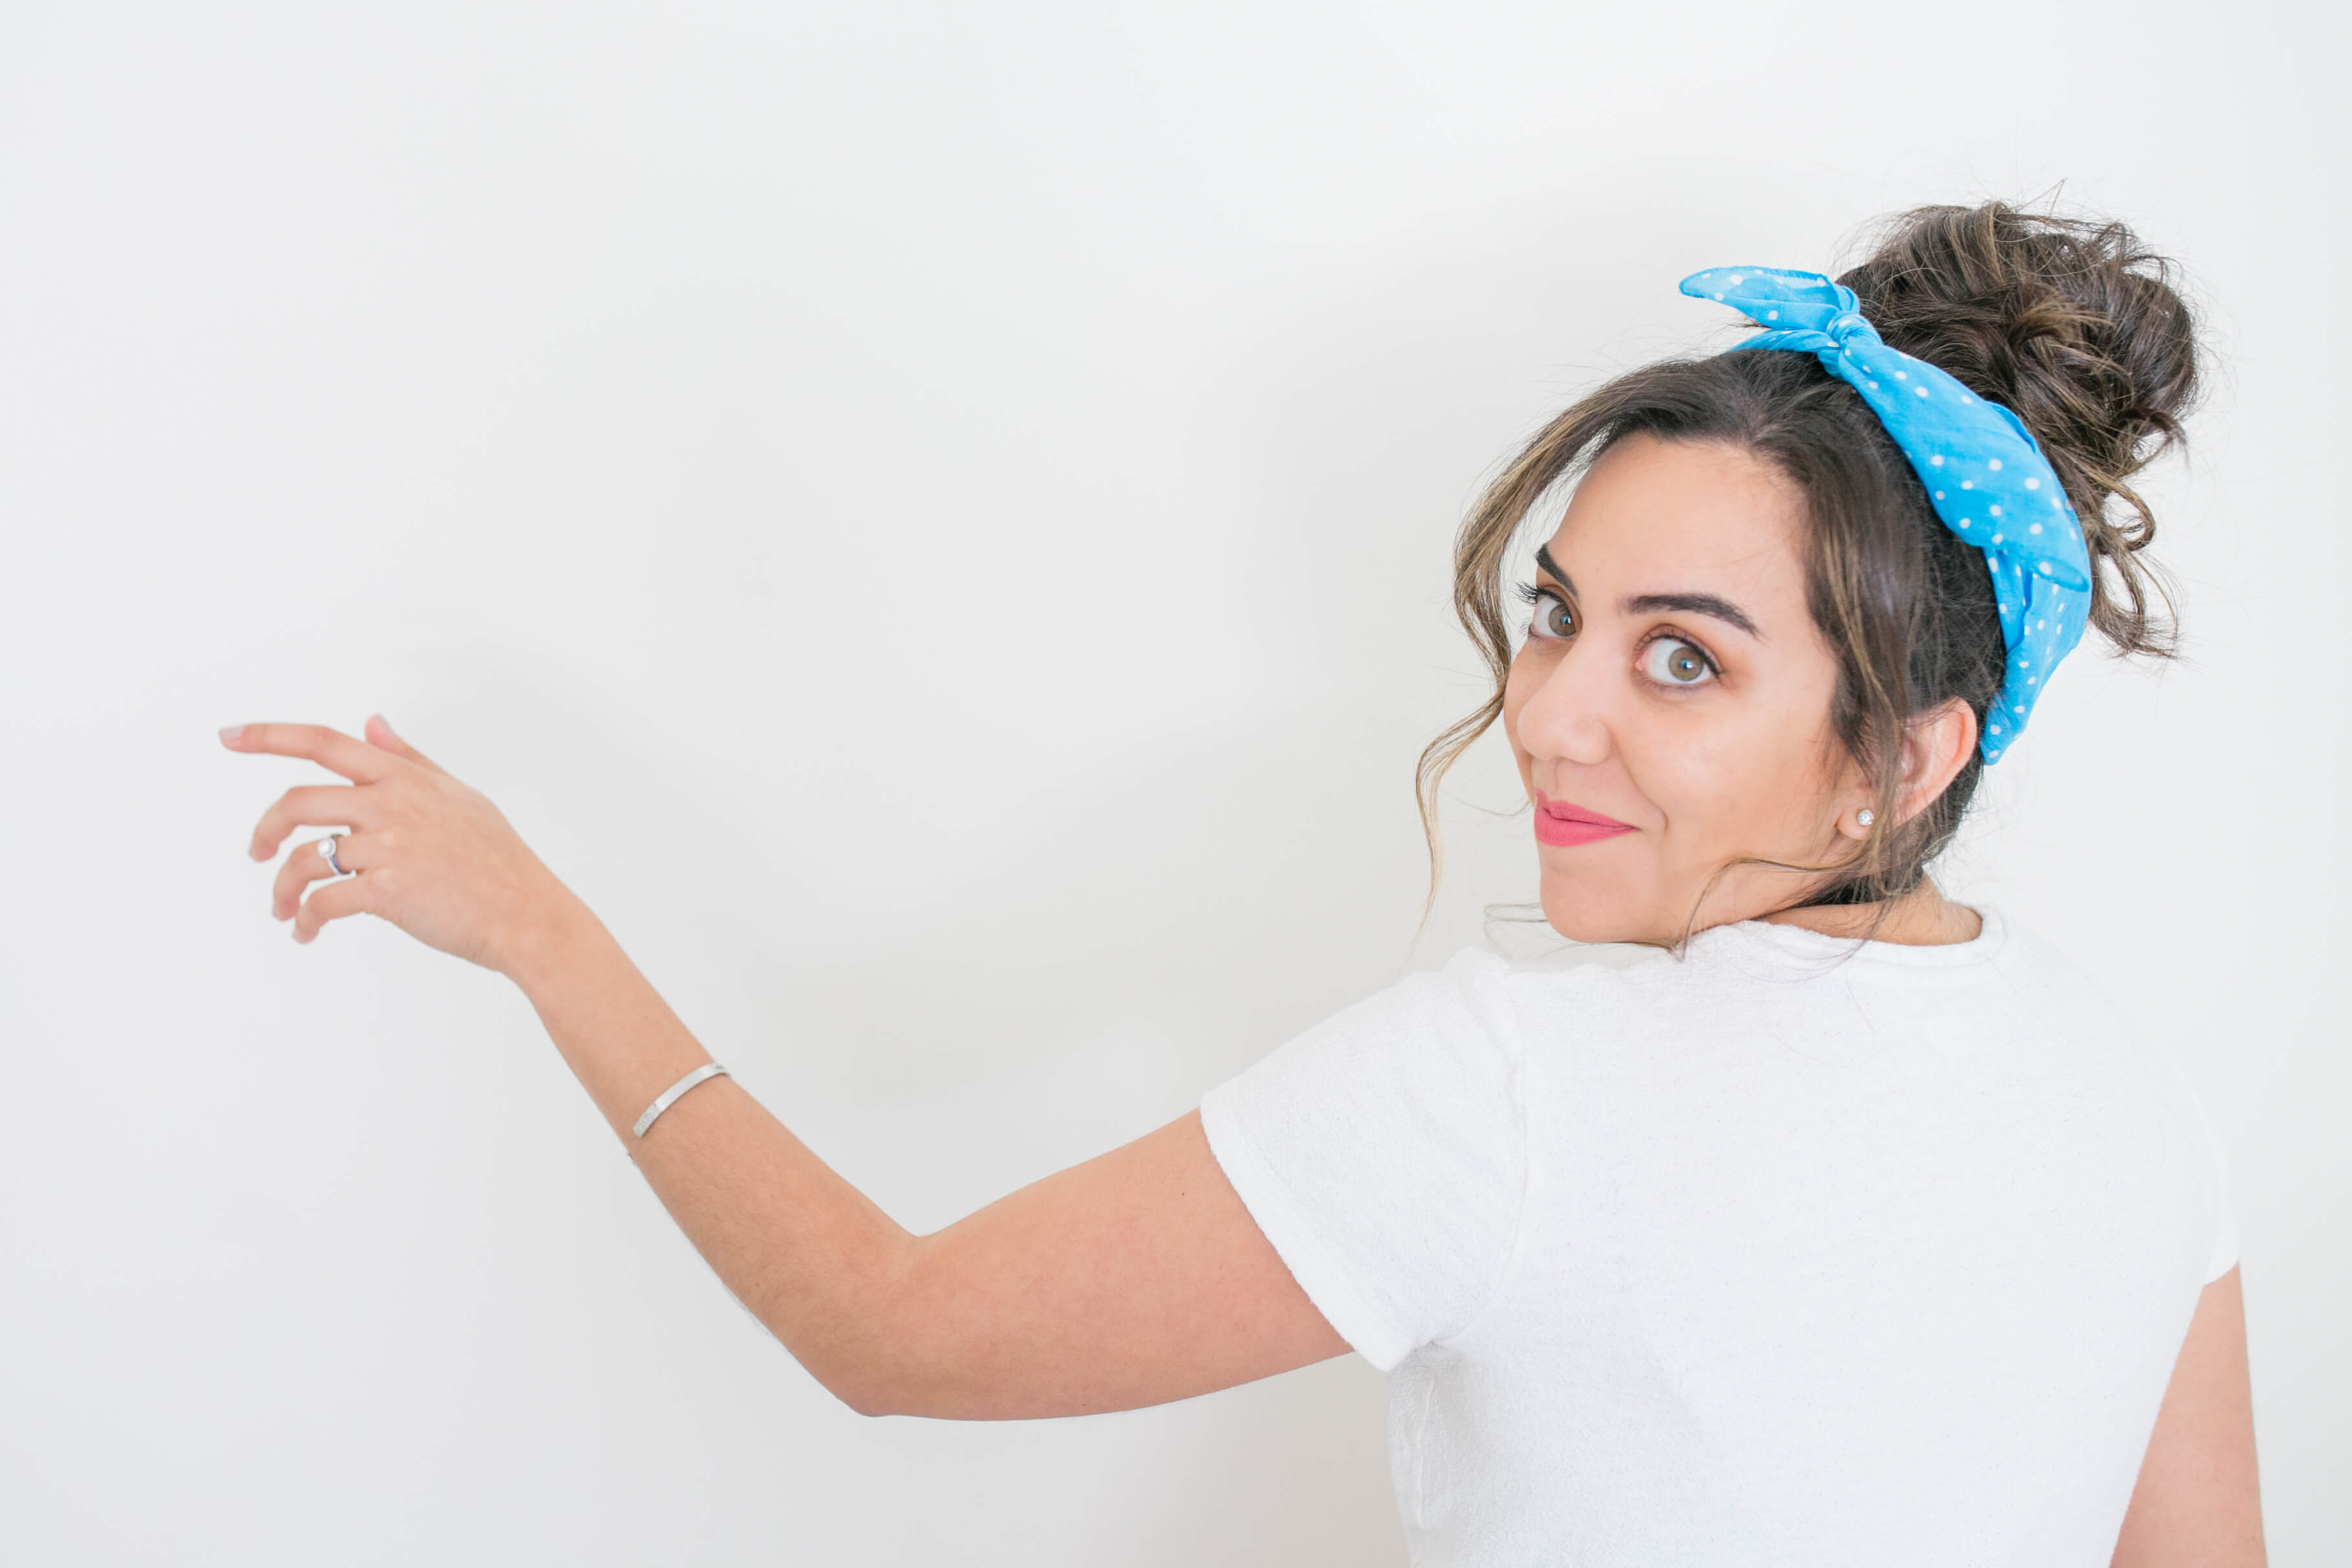 A quick and simple Cinderella top knot tutorial inspired by one of the original Disney princesses! A step-by-step style for your next Disneybound.